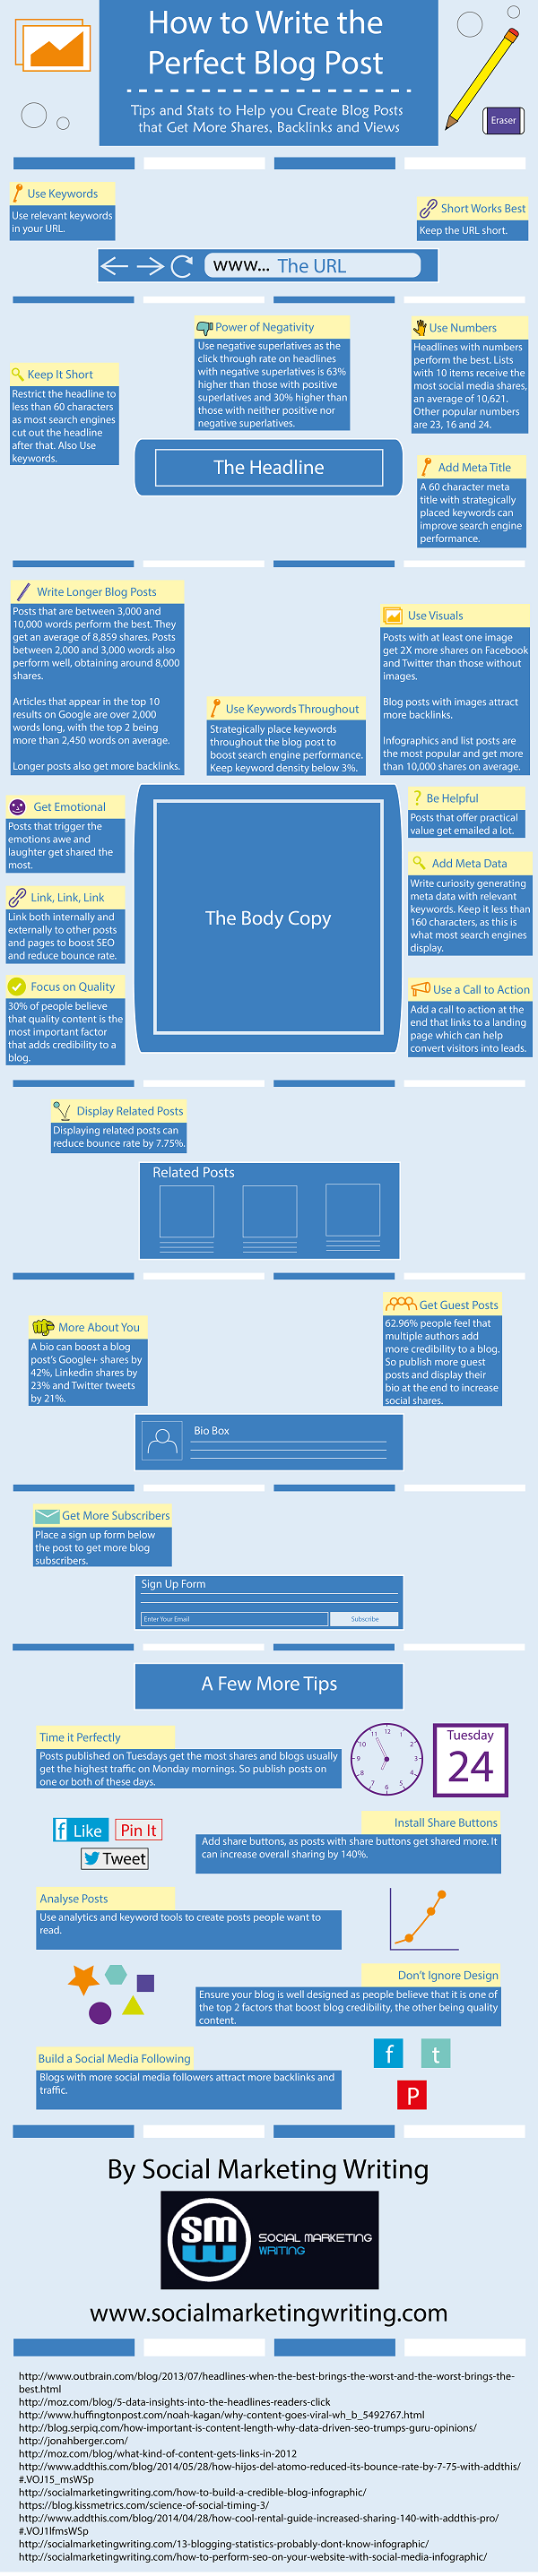 How to Write the Perfect Blog Post [Infographic]